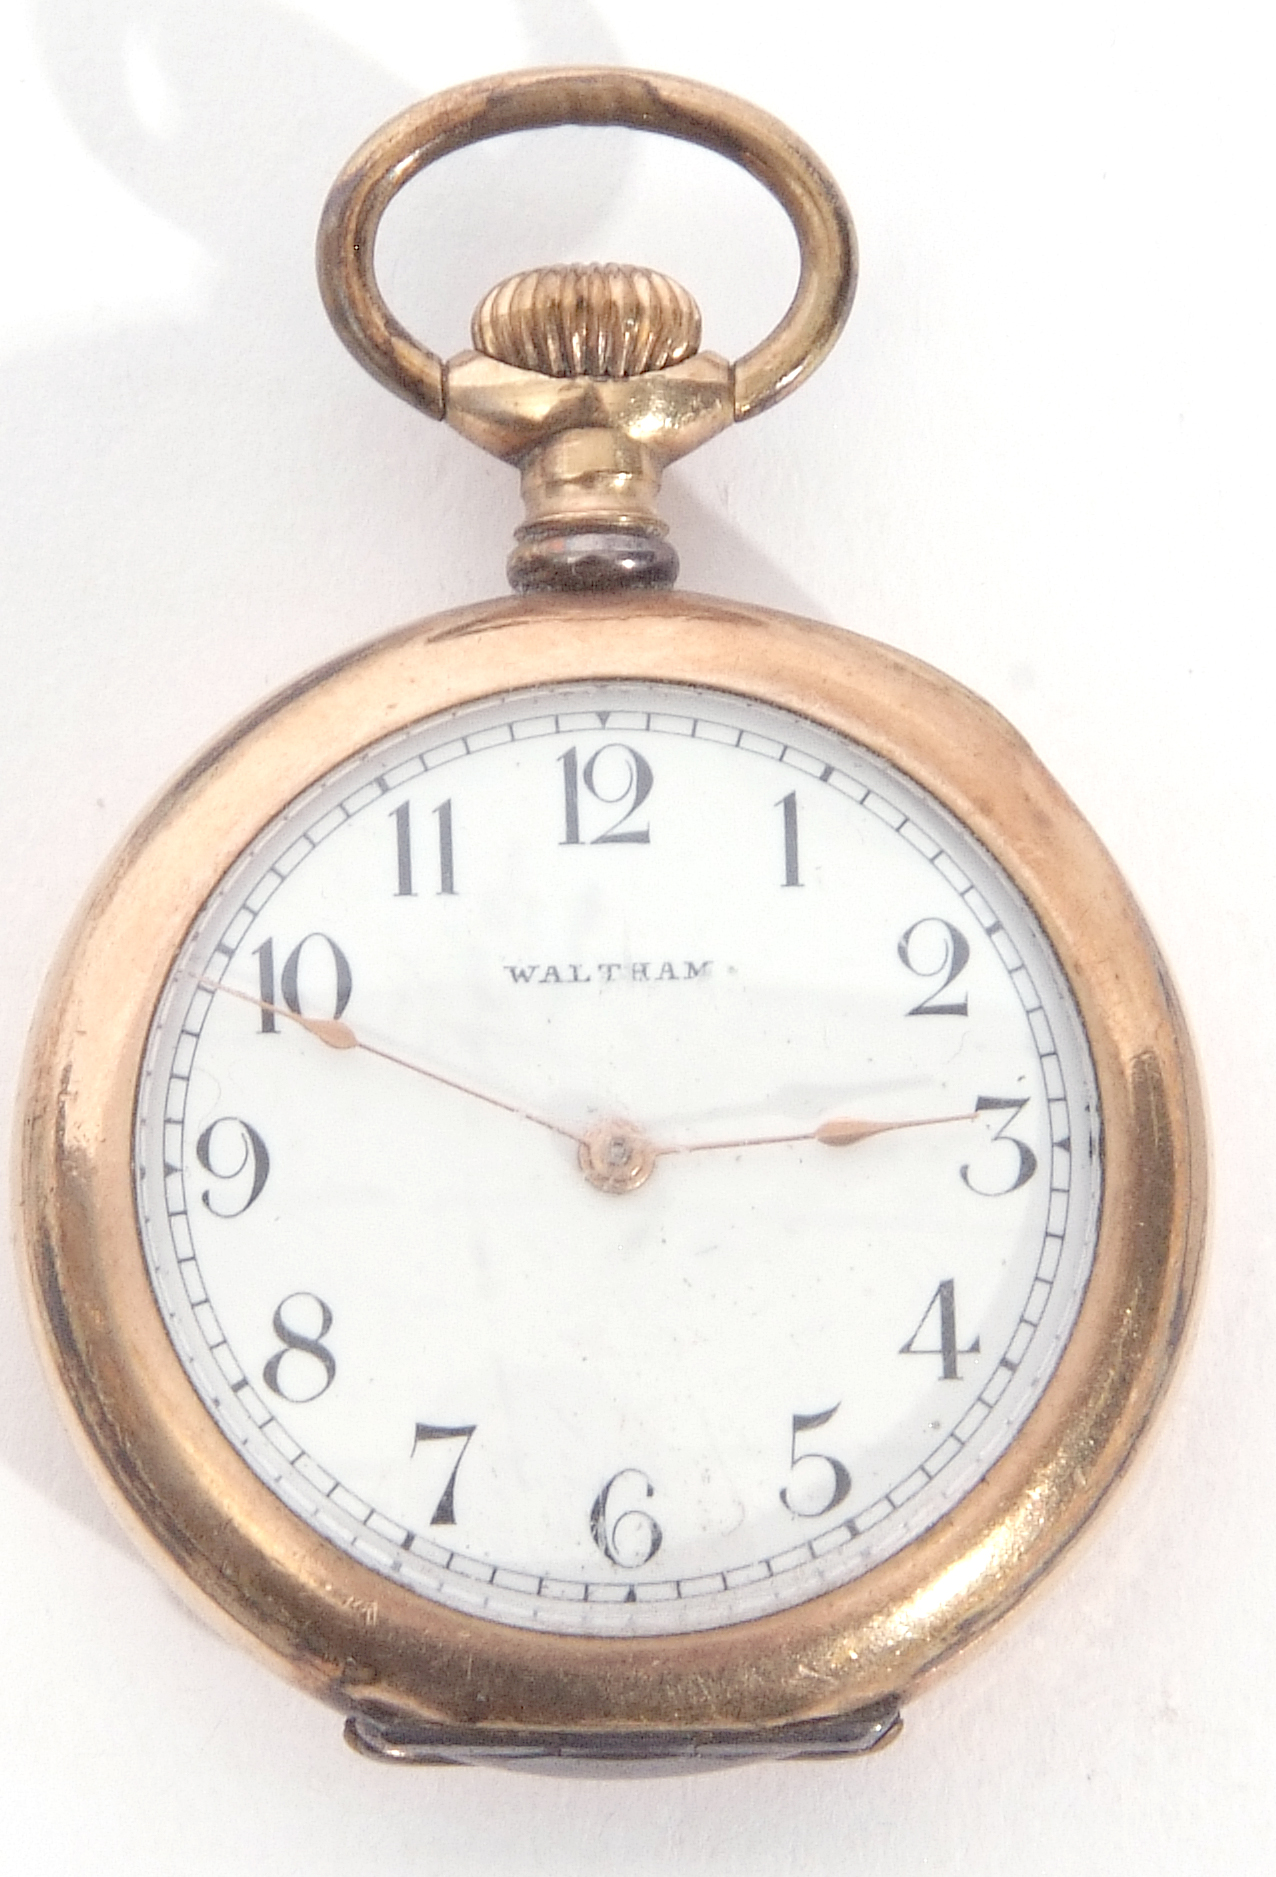 Last quarter of 19th/first quarter of 20th century Waltham gold plated fob watch with gold hands